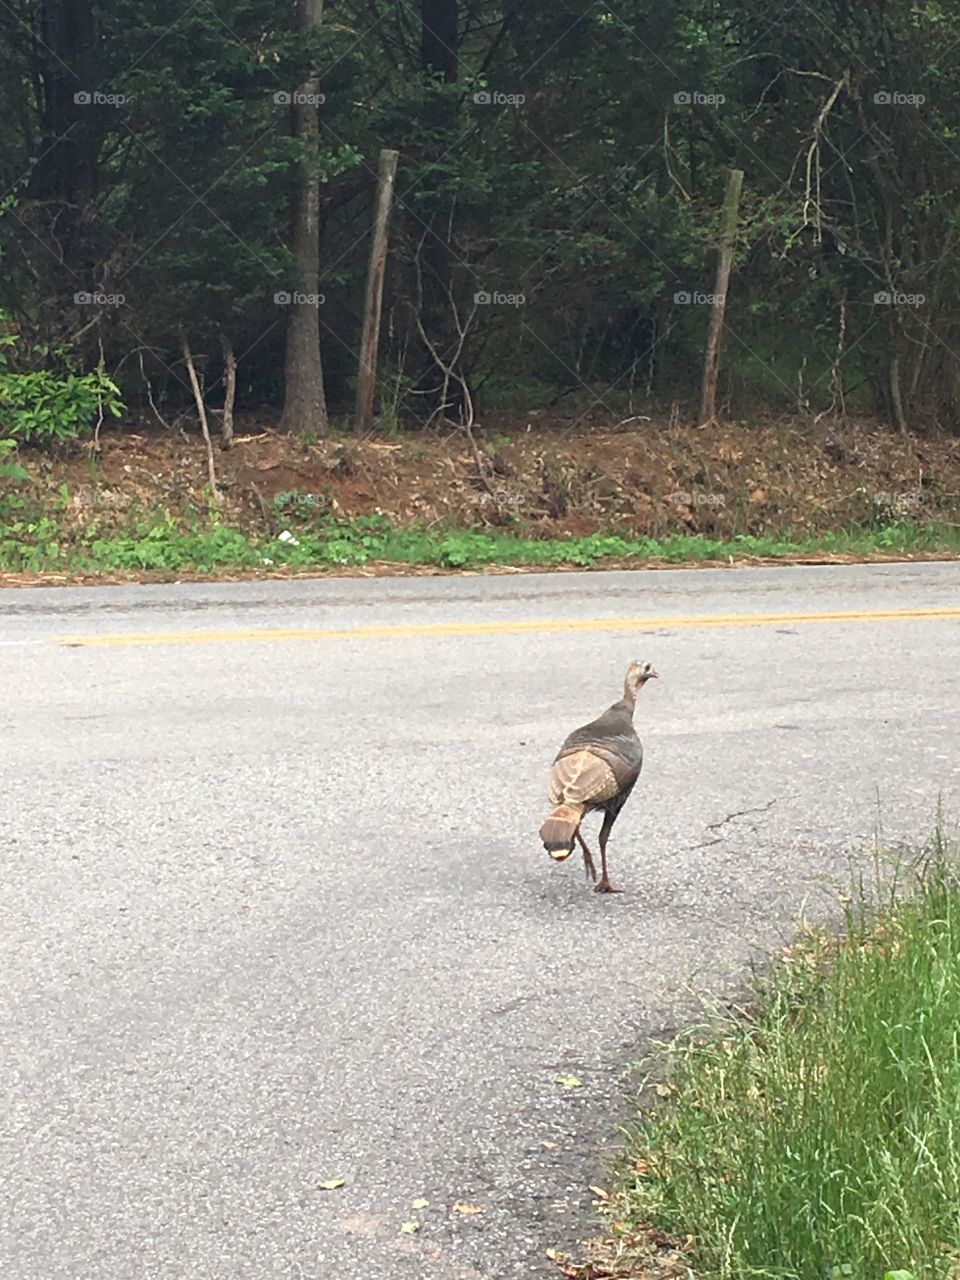 Why did the turkey make a right turn? 